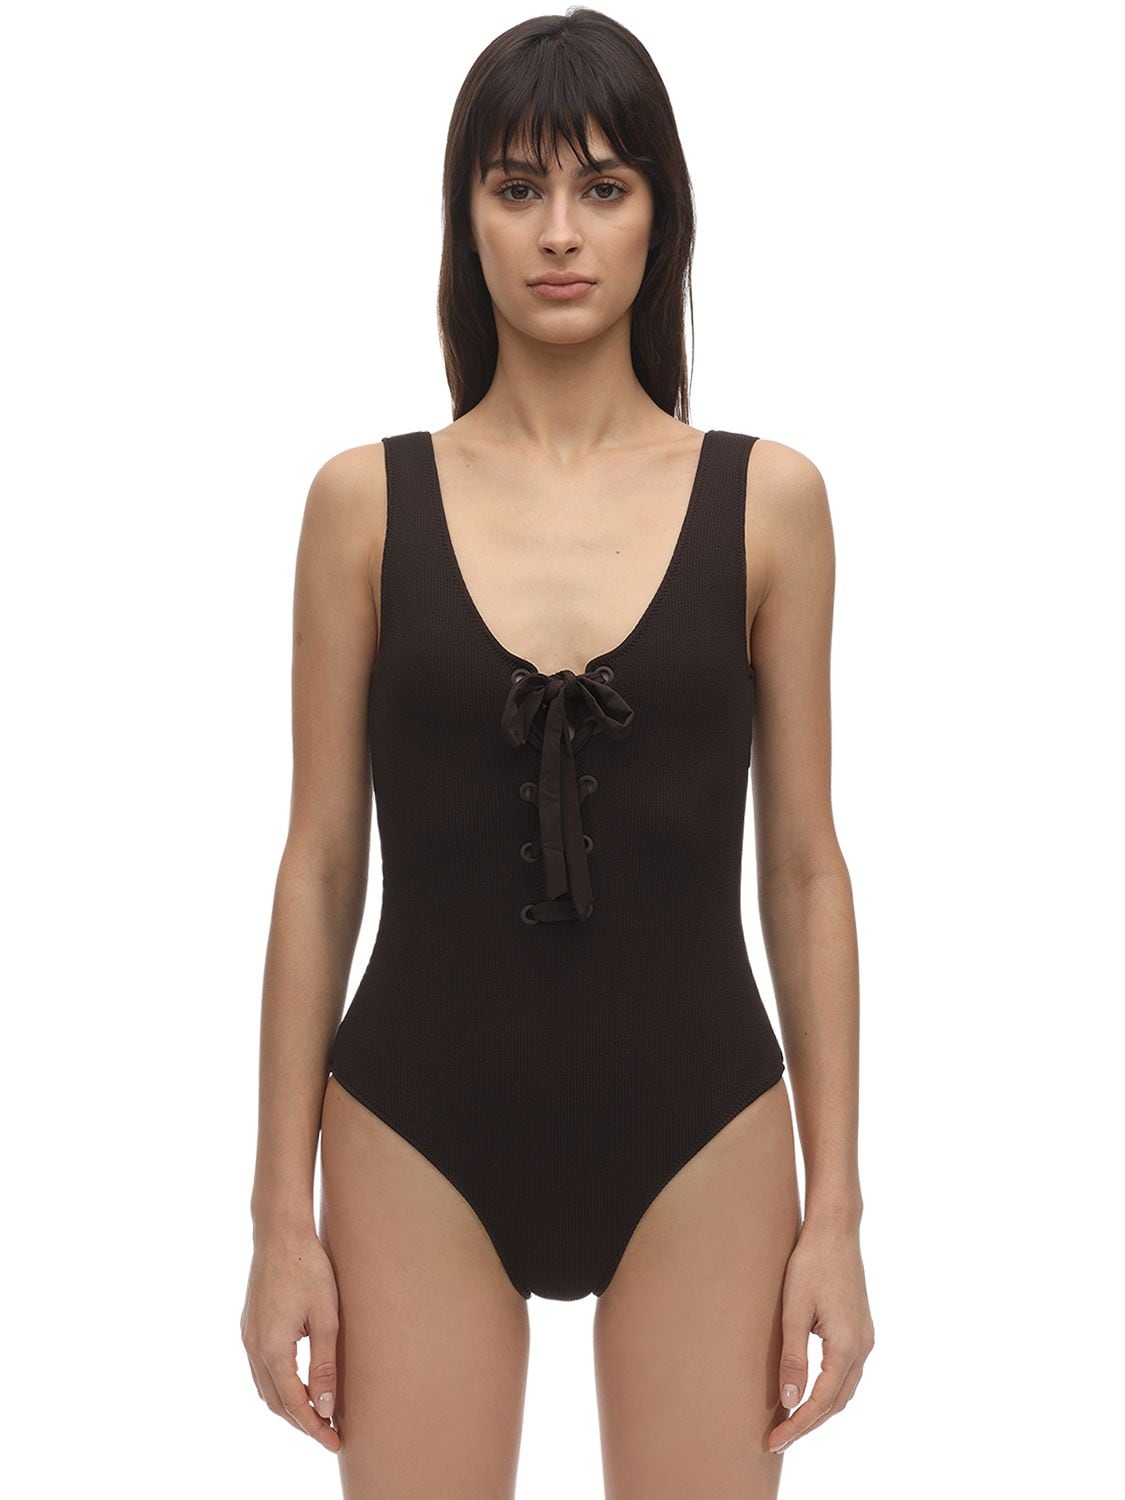 GANNI TEXTURED LACE-UP ONE PIECE SWIMSUIT,71ICDL004-ODK30